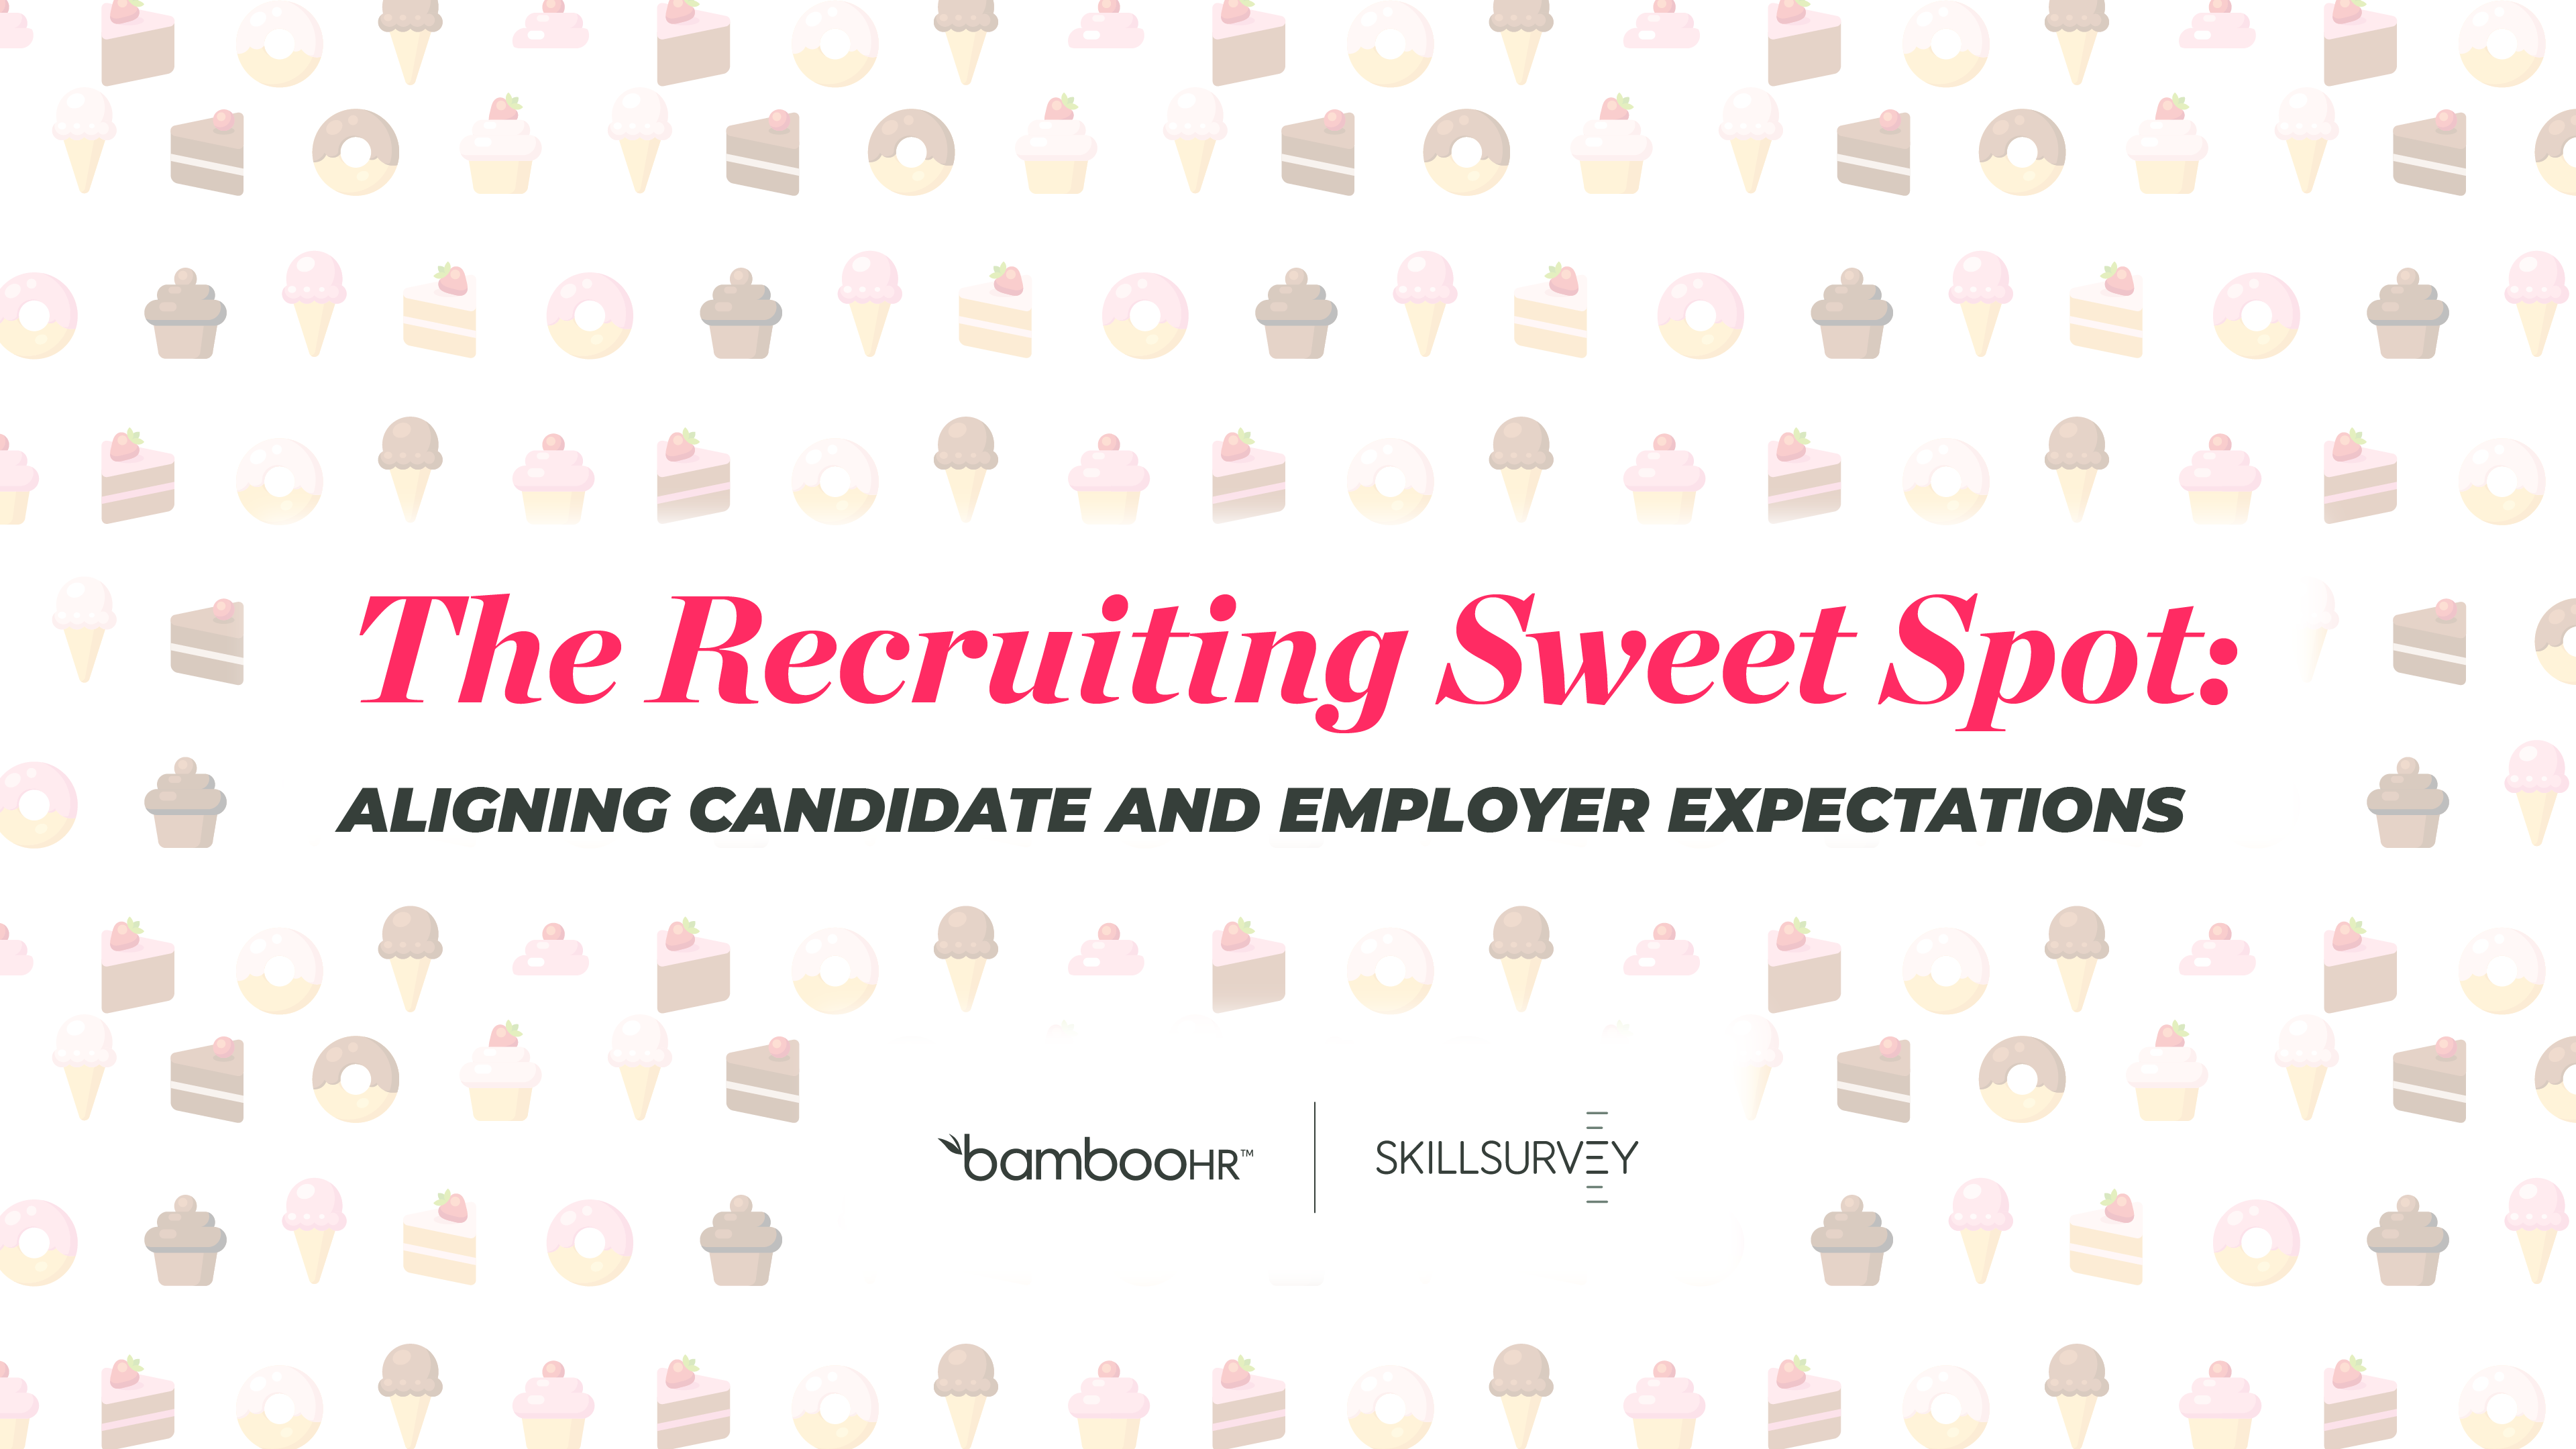 The Recruiting Sweet Spot: Aligning Candidate and Employer Expectations